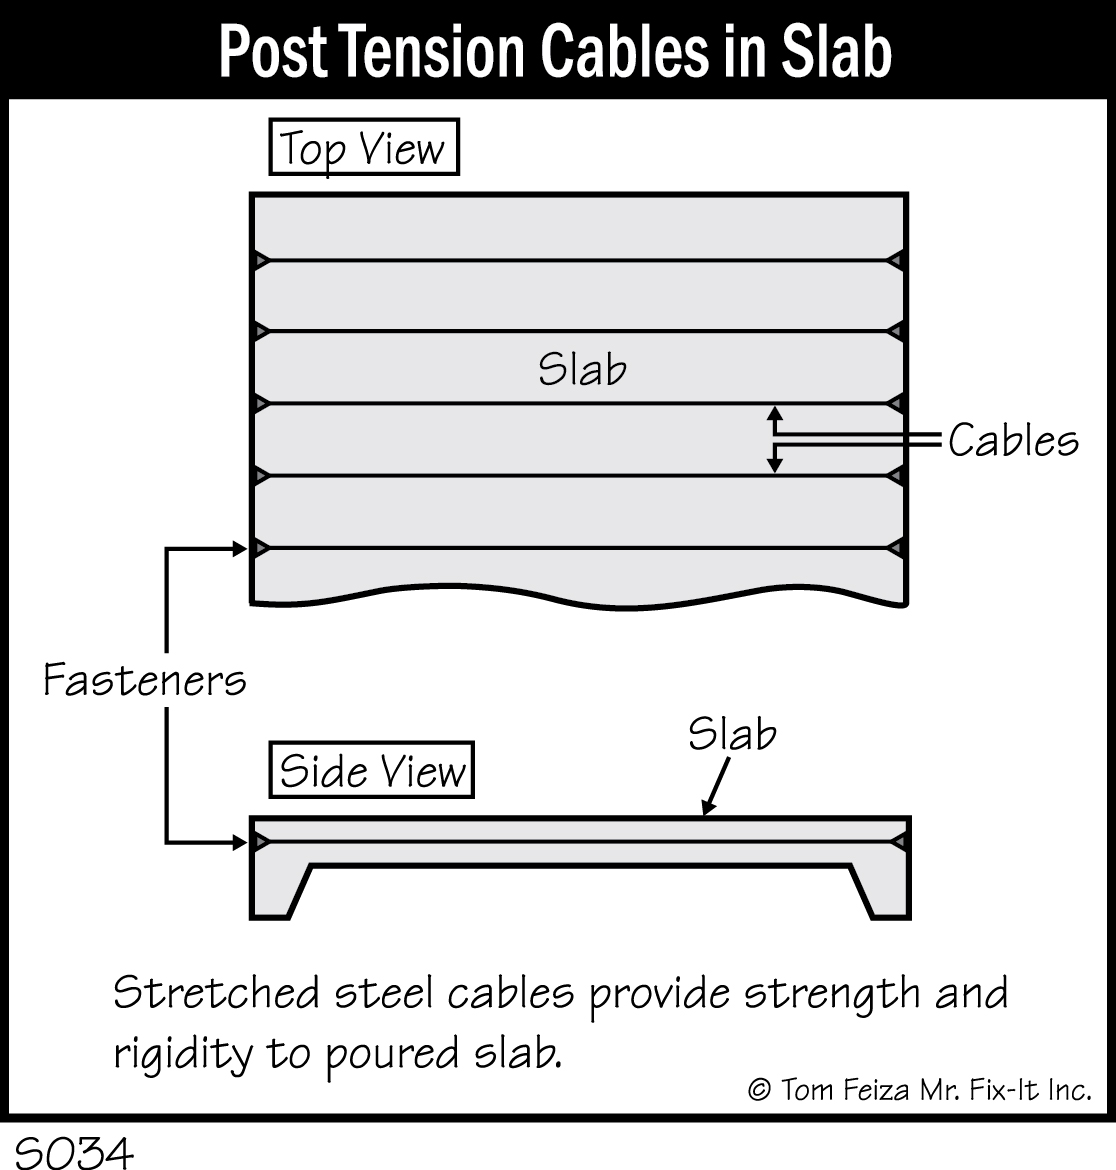 S034 - Post Tension Cables in Slab